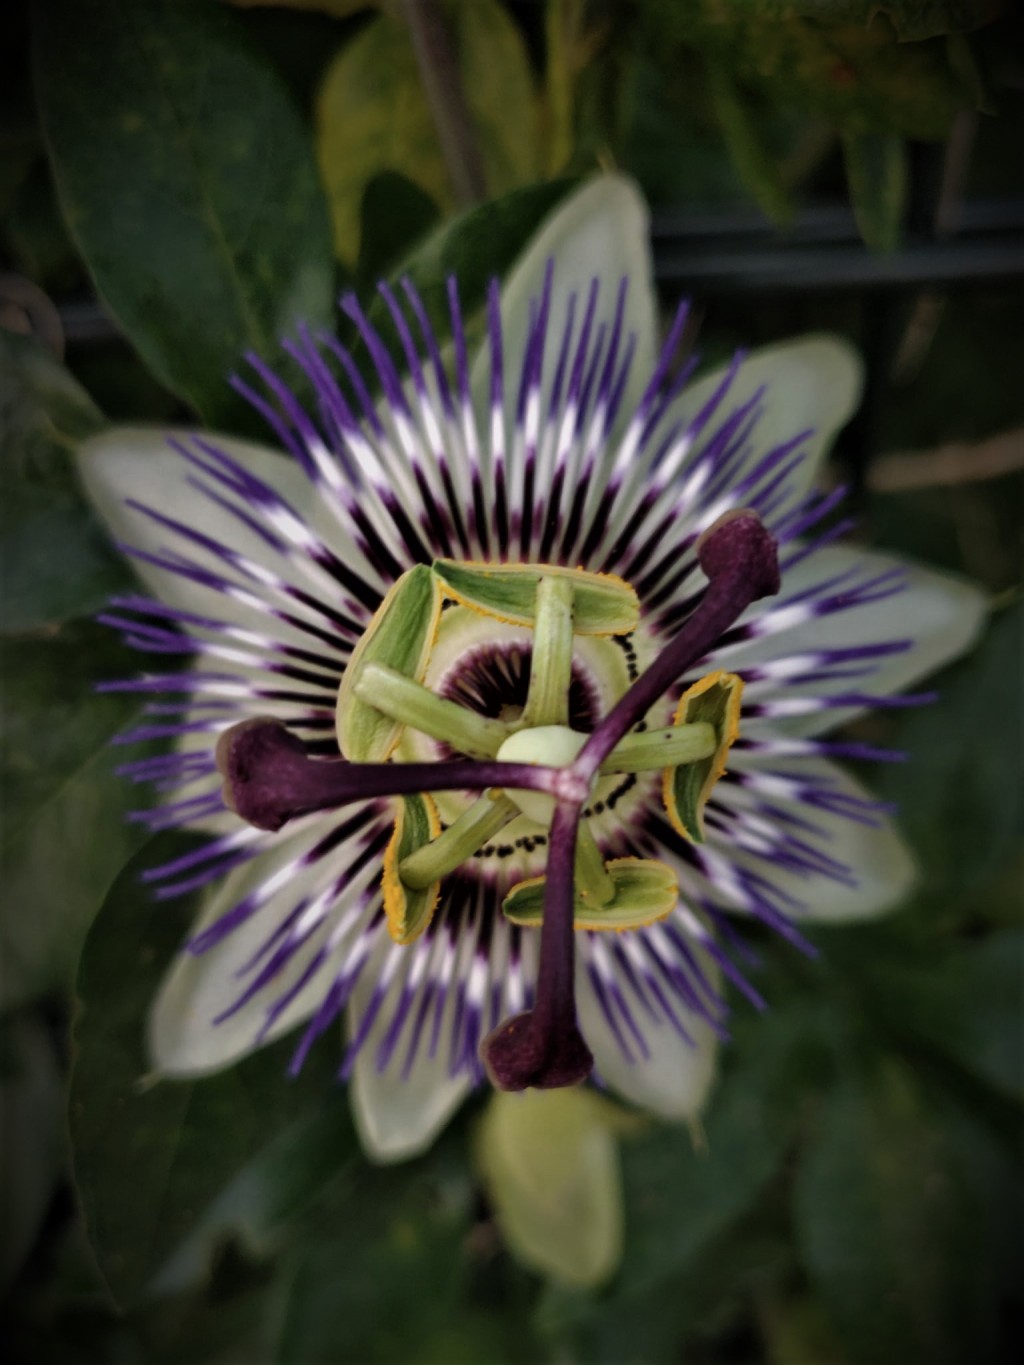 How to grow passion flowers in a cold climate?